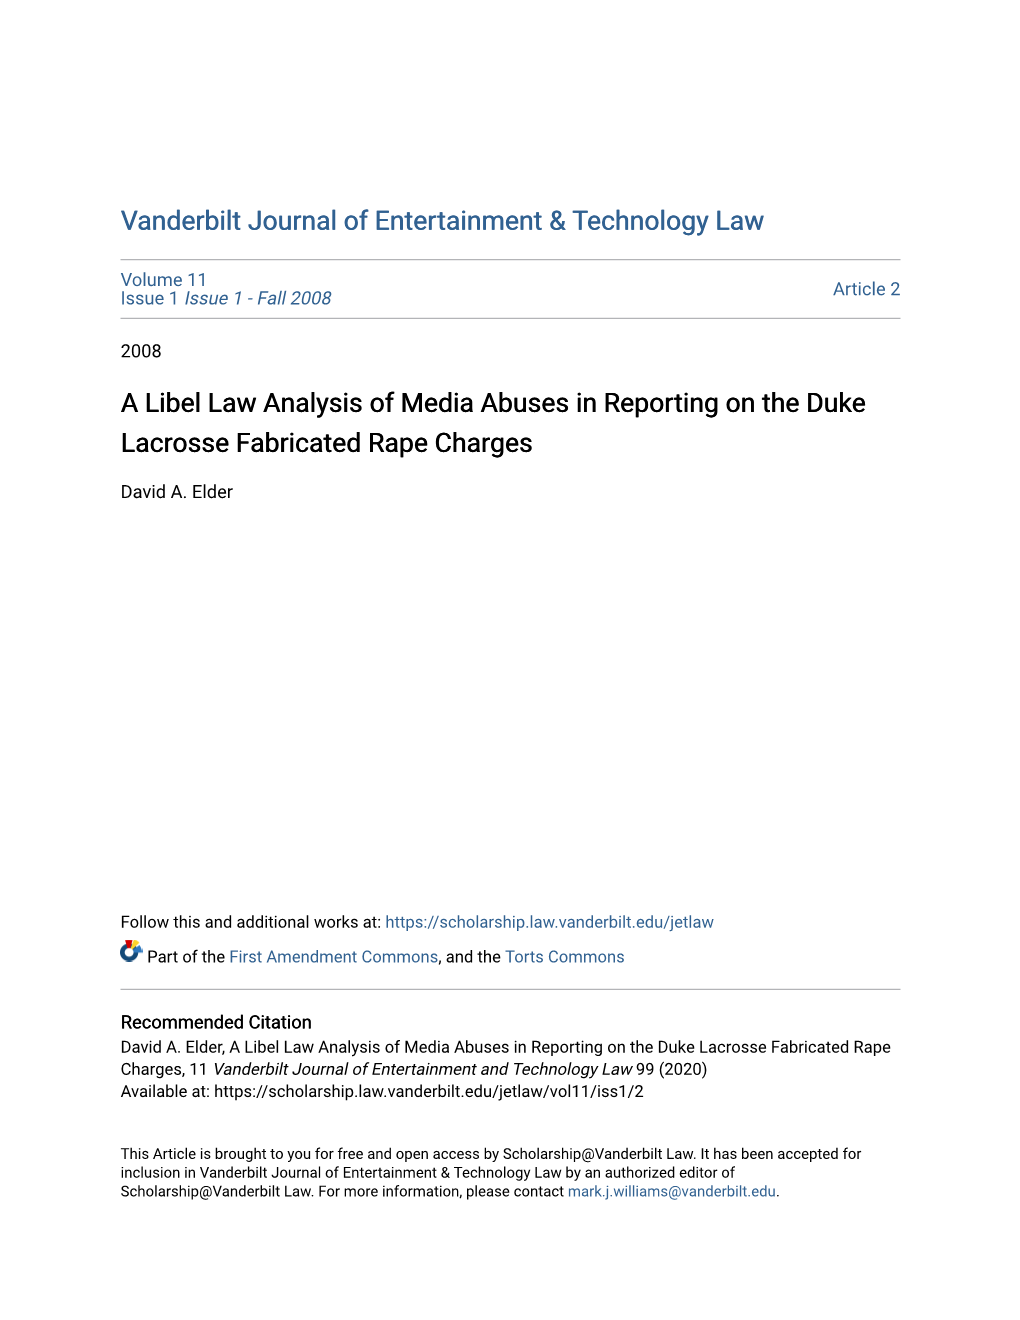 A Libel Law Analysis of Media Abuses in Reporting on the Duke Lacrosse Fabricated Rape Charges